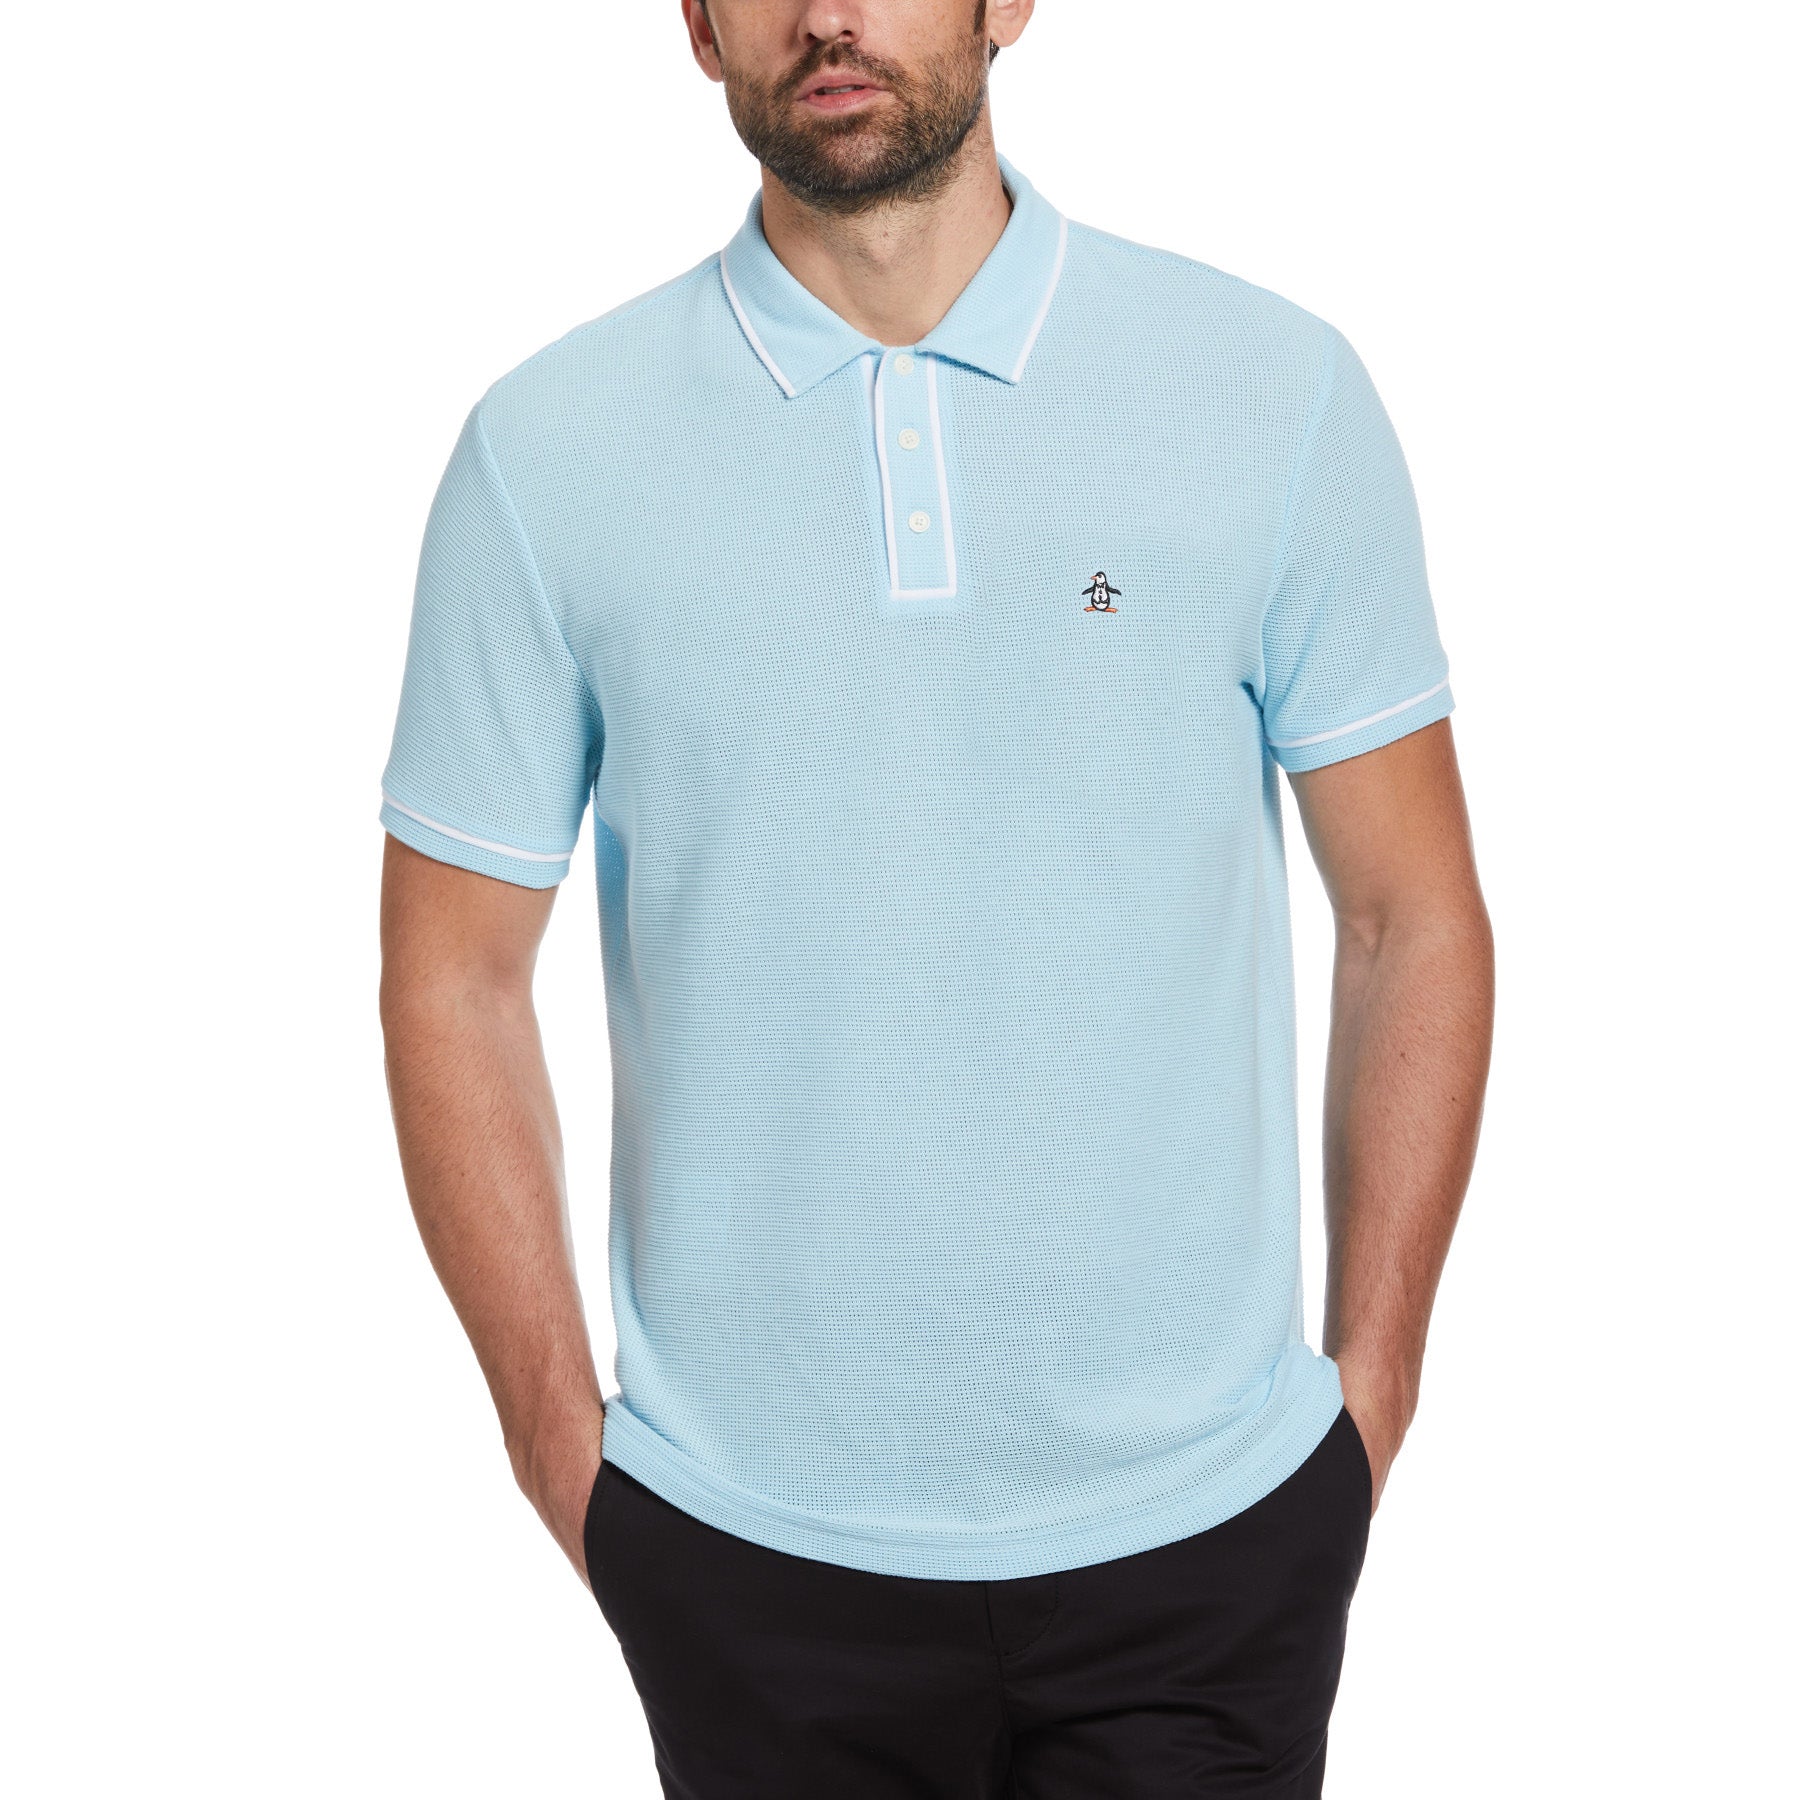 View Icons Organic Cotton Bentley Mesh Short Sleeve Polo Shirt In Cool Blue information